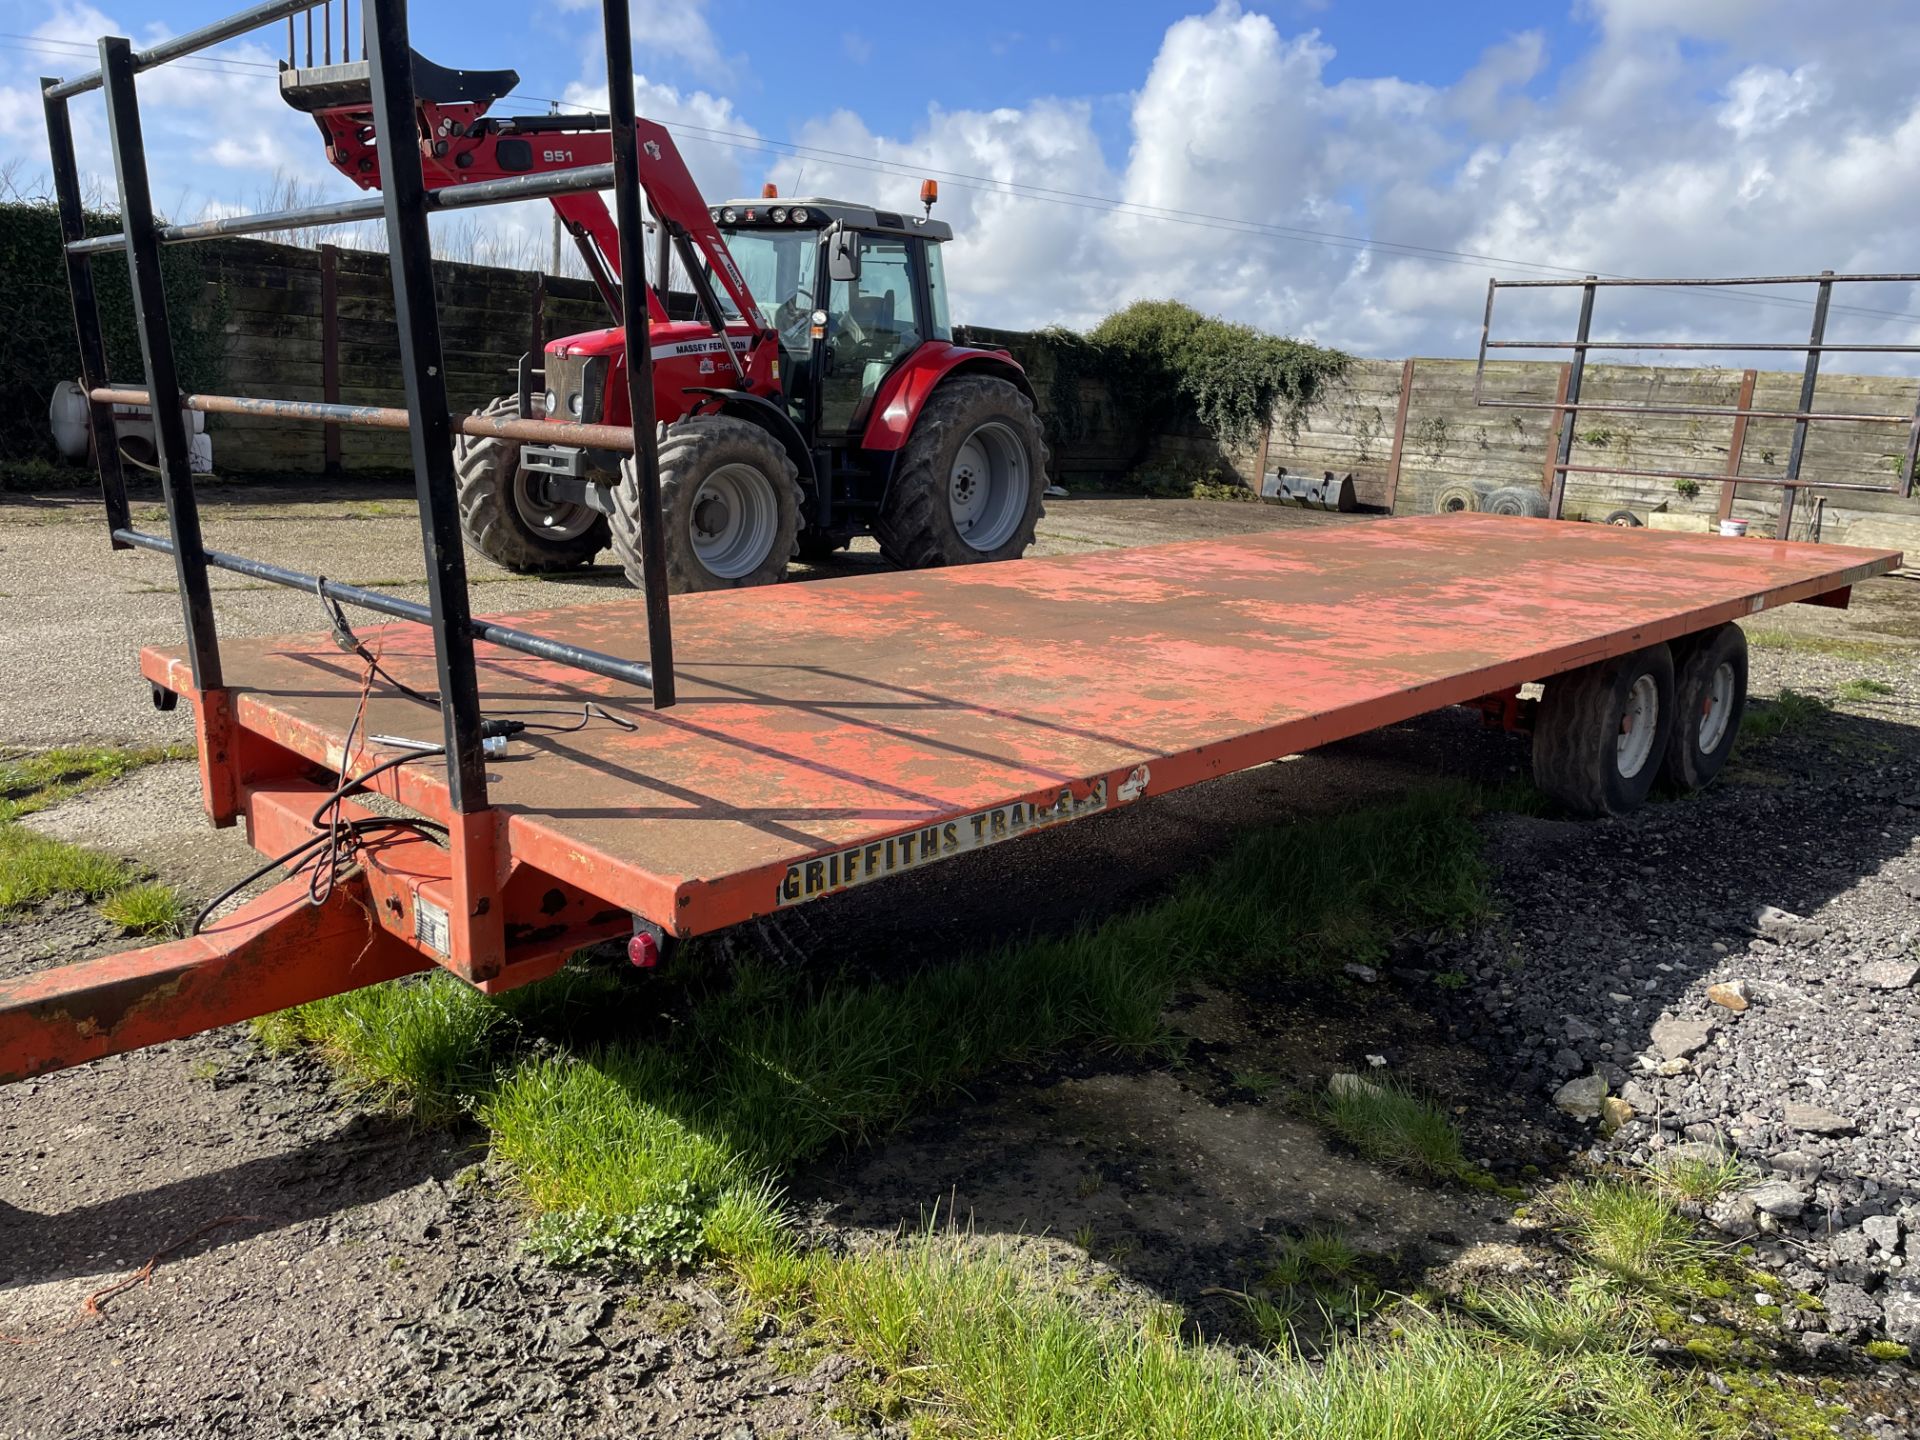 1995 Griffiths 8 ton 25' Bale Trailer with ladders front and rear - owned from new - Subject to VAT - Bild 2 aus 3